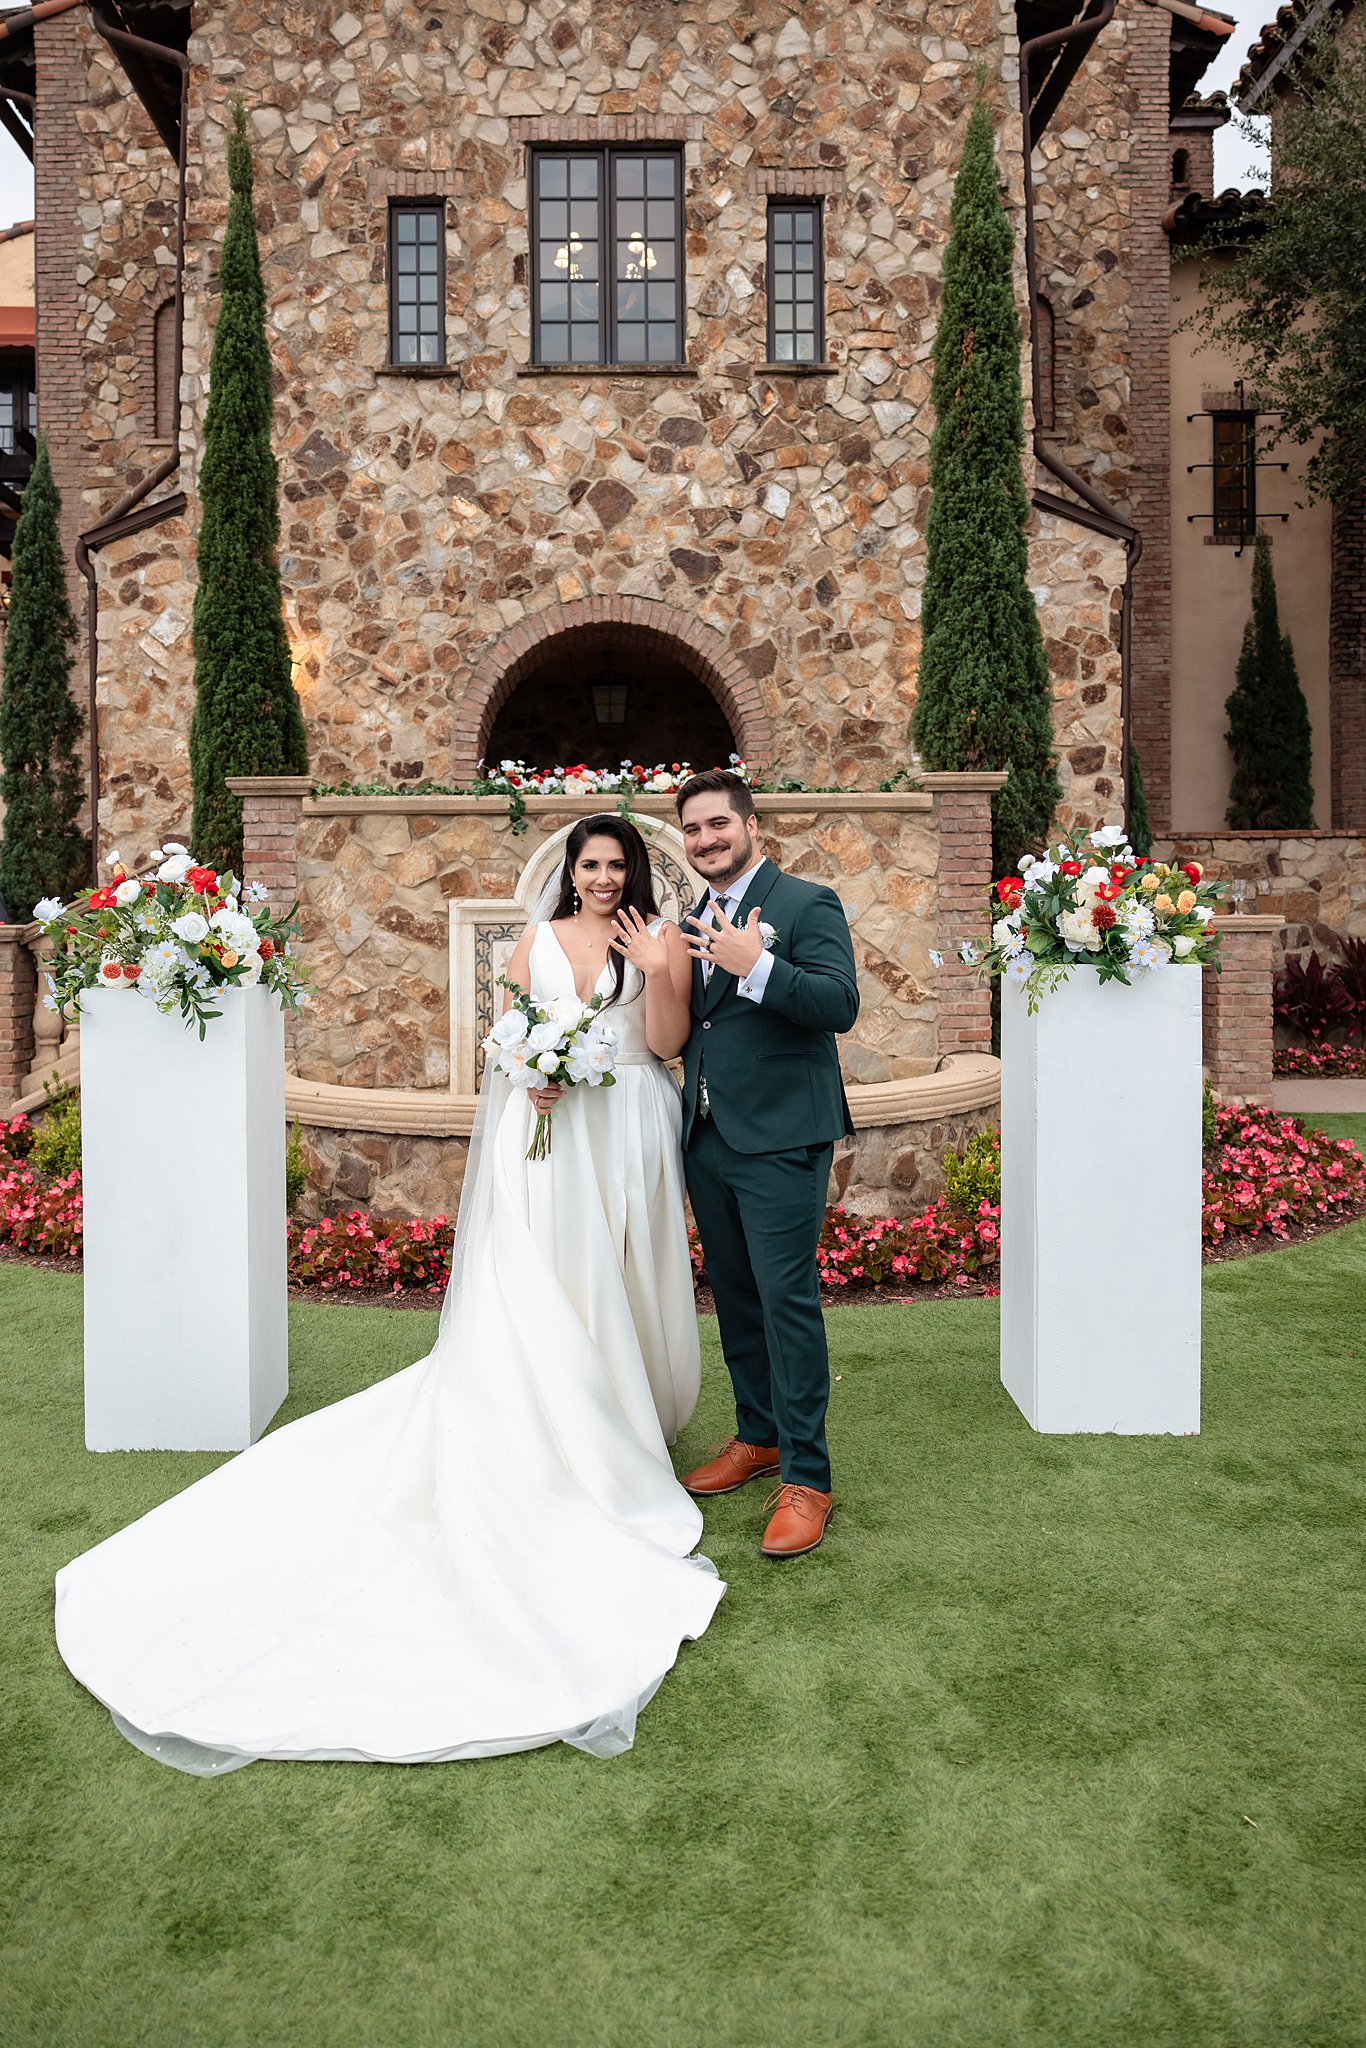 Newlyweds show off their rings in a garden lawn wedding ceremony location